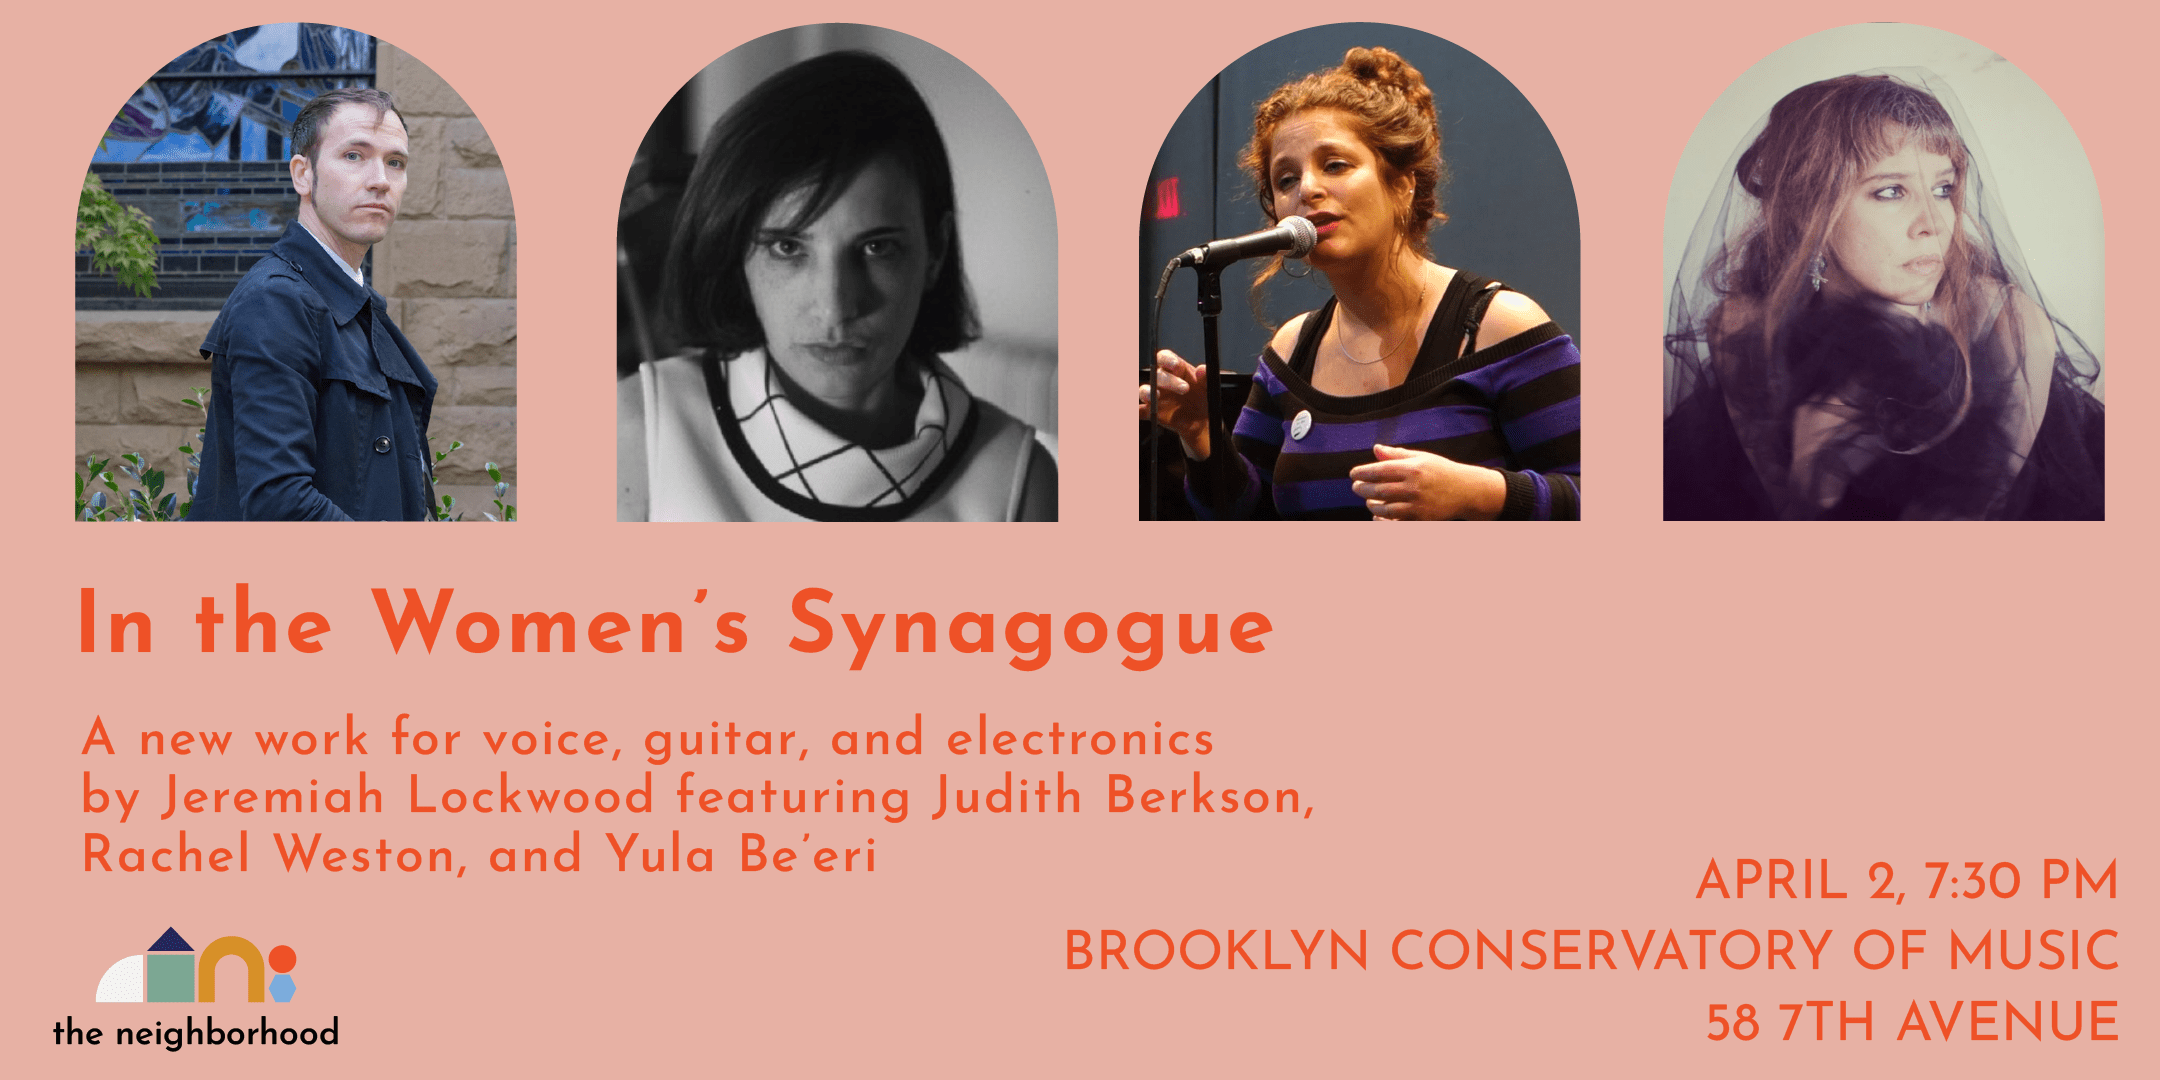 In The Women's Synagogue/In der vayber shul: A New Work for Voice, Guitar, and Electronics